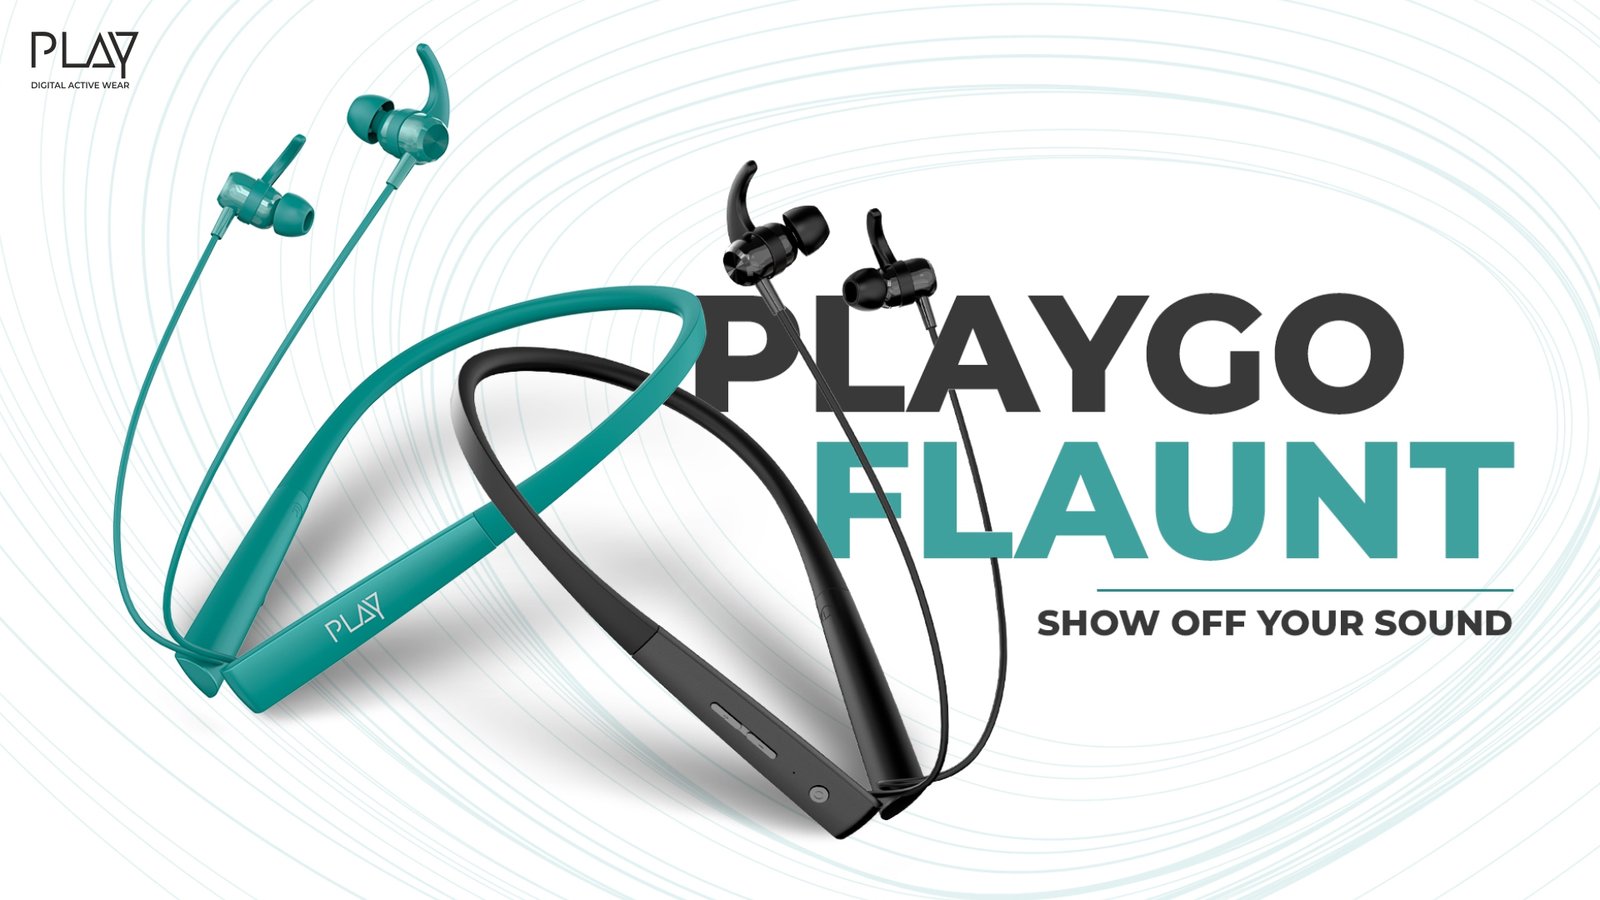 PLAY launches PLAYGO MUZE, PLAYGO BUDSLITE and PLAYGO FLAUNT